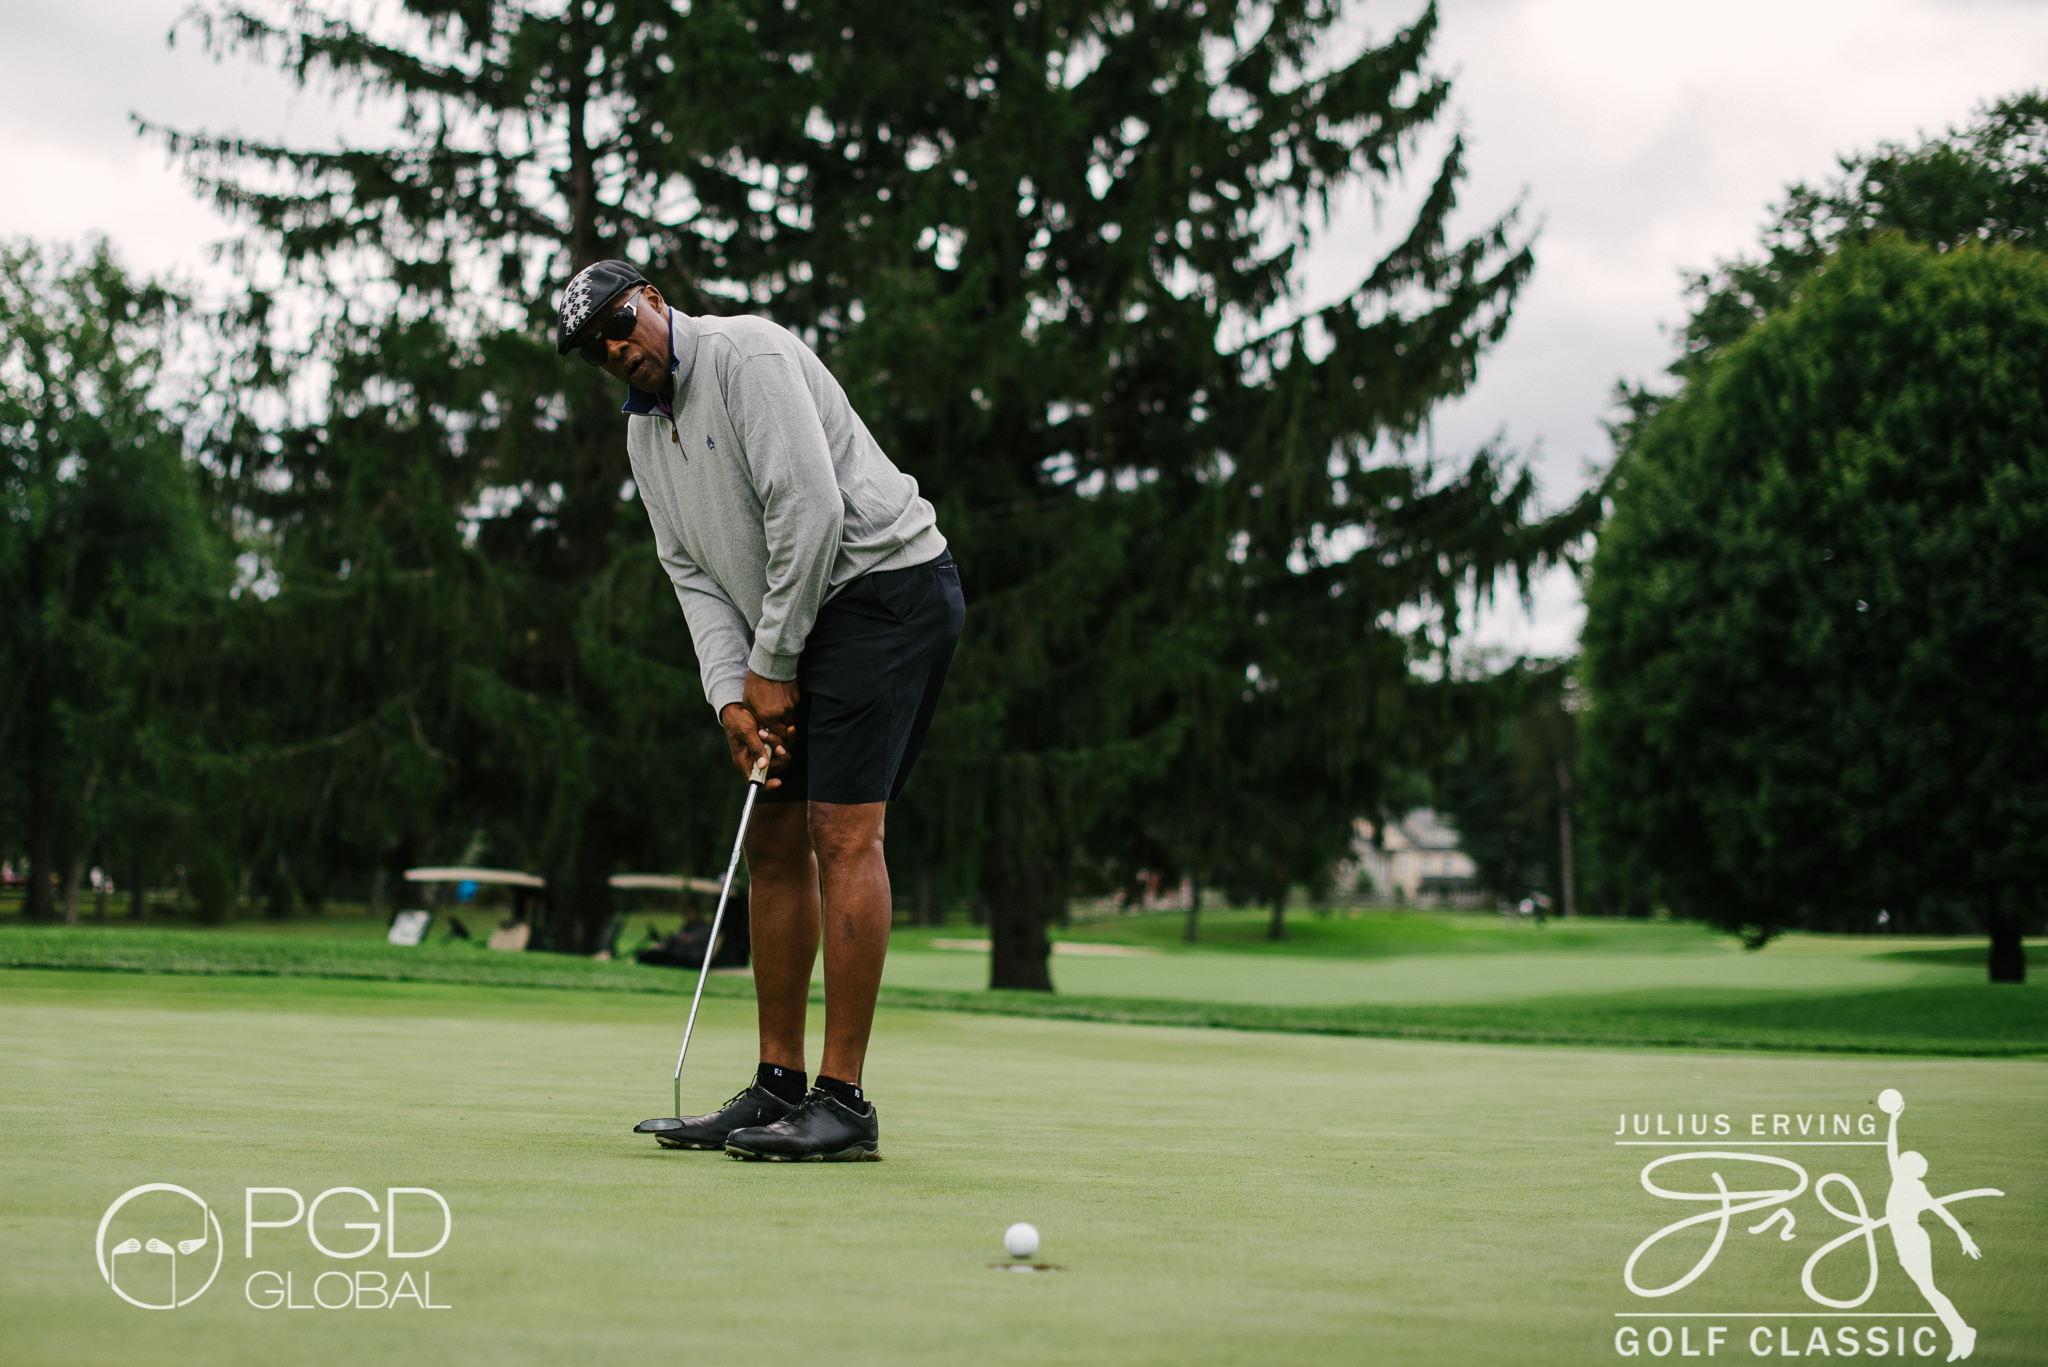 Dr. J tees it up at the 2015 Julius Erving Golf Classic in Philadelphia, PA